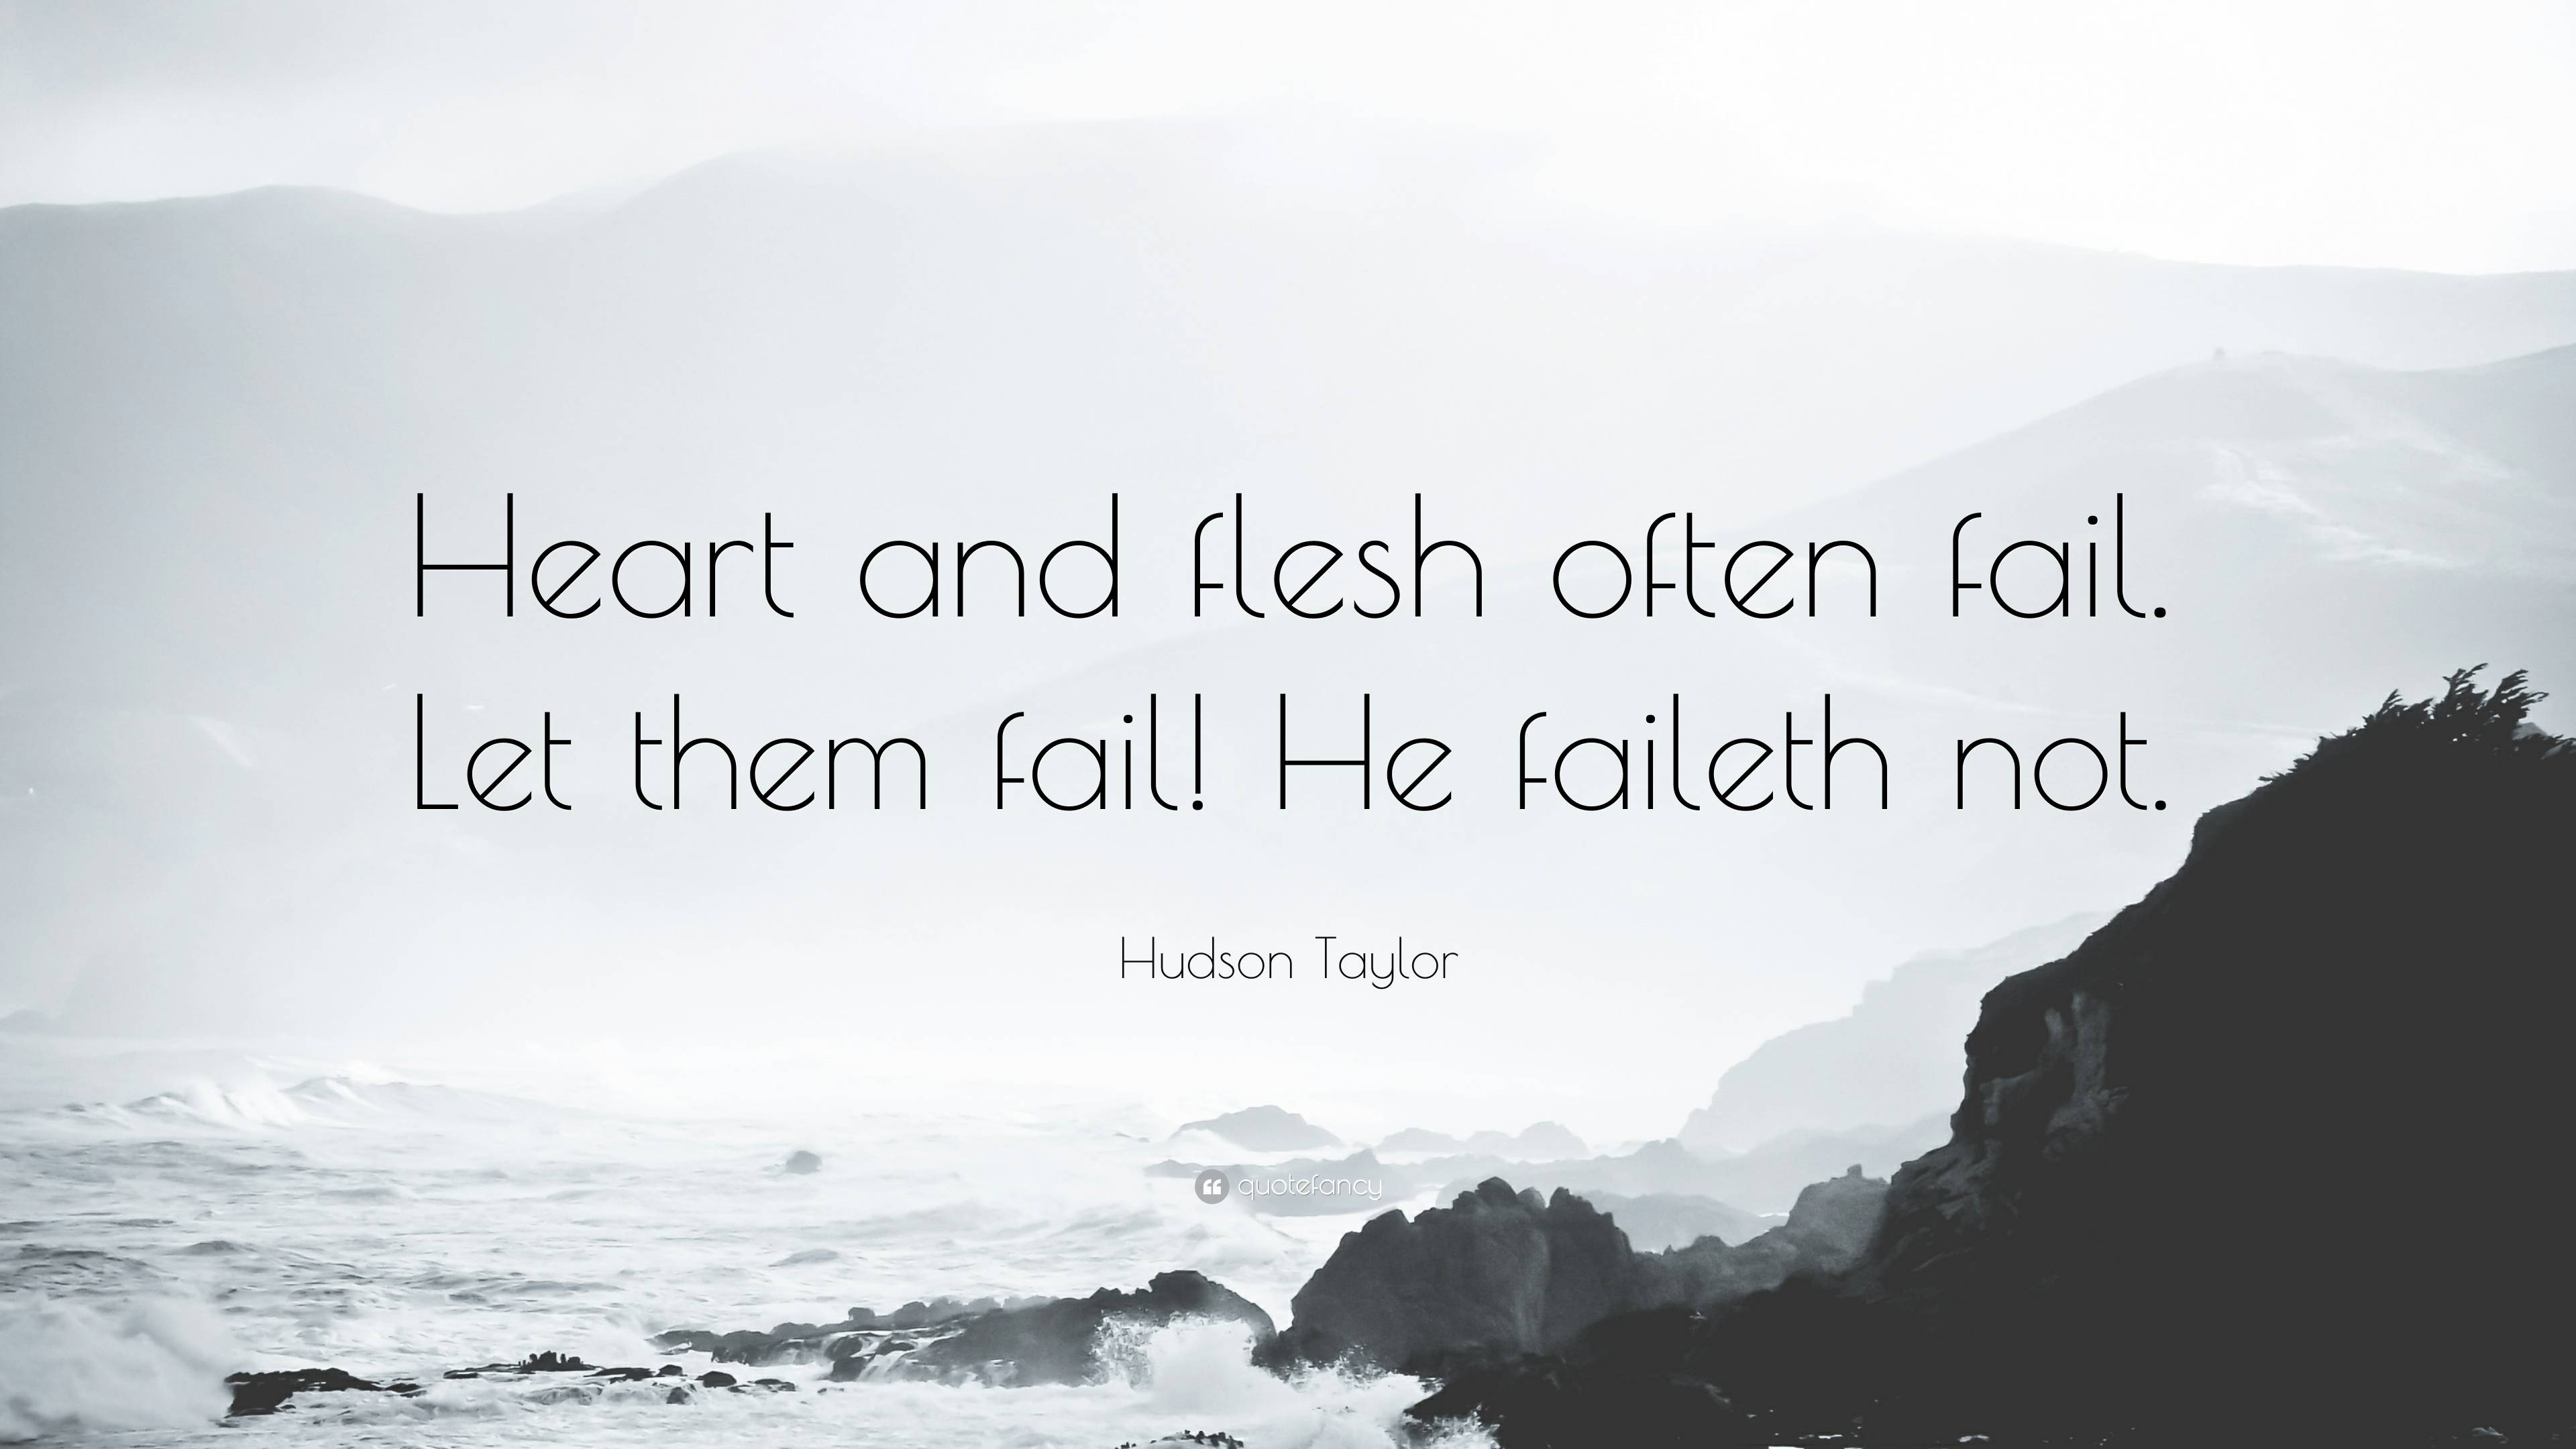 Hudson Taylor Quote: “Heart and flesh often fail. Let them fail! He ...